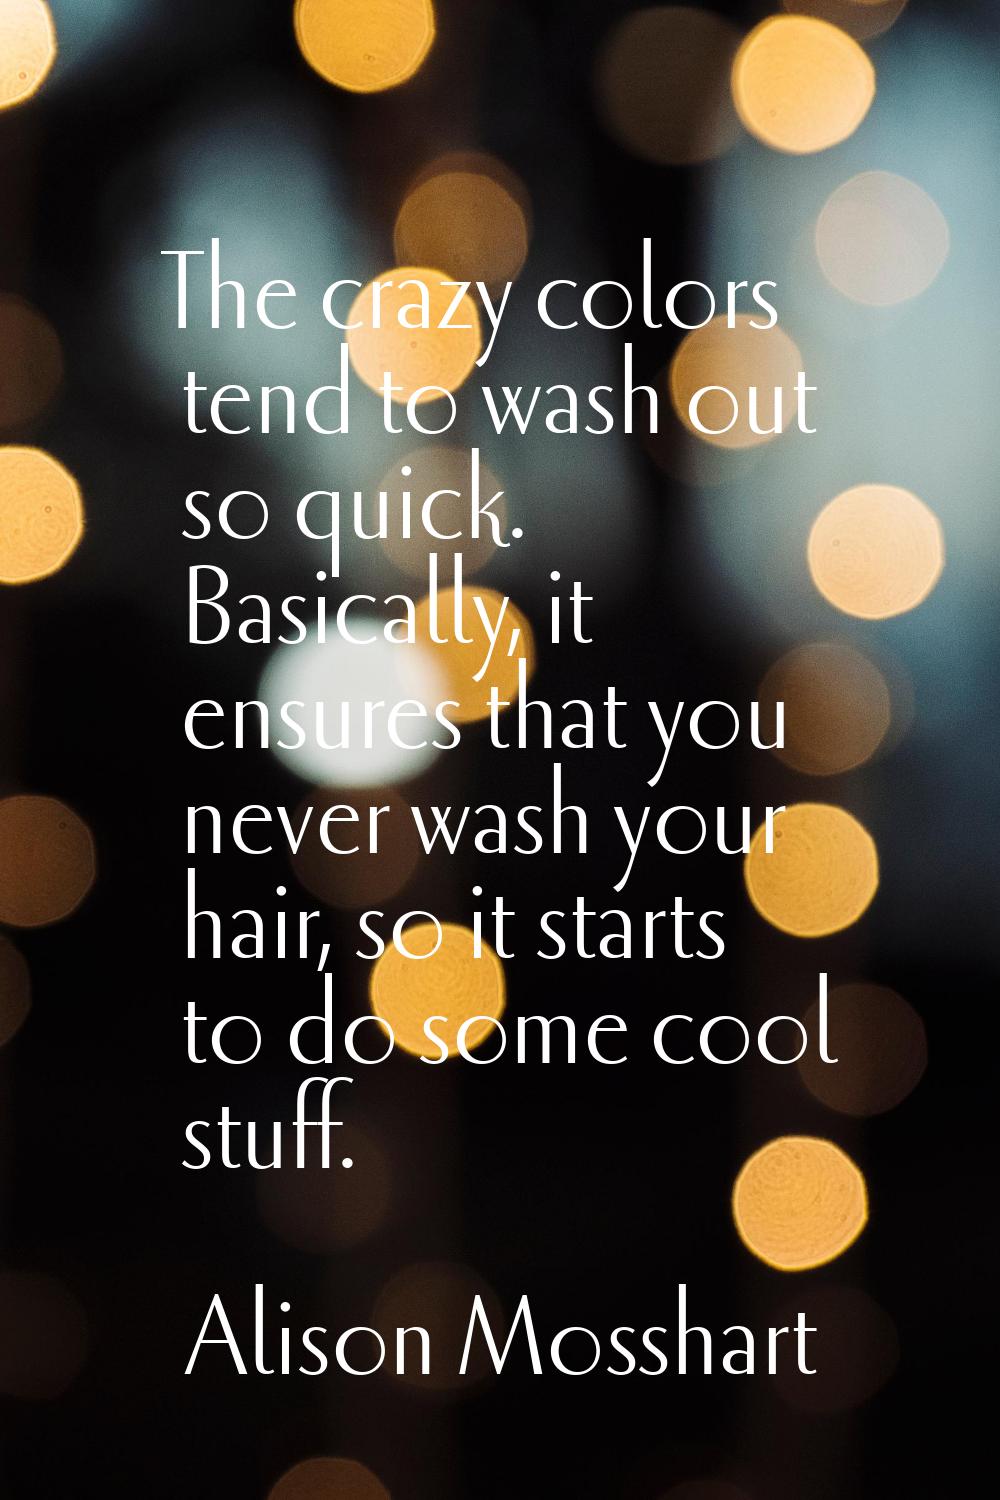 The crazy colors tend to wash out so quick. Basically, it ensures that you never wash your hair, so